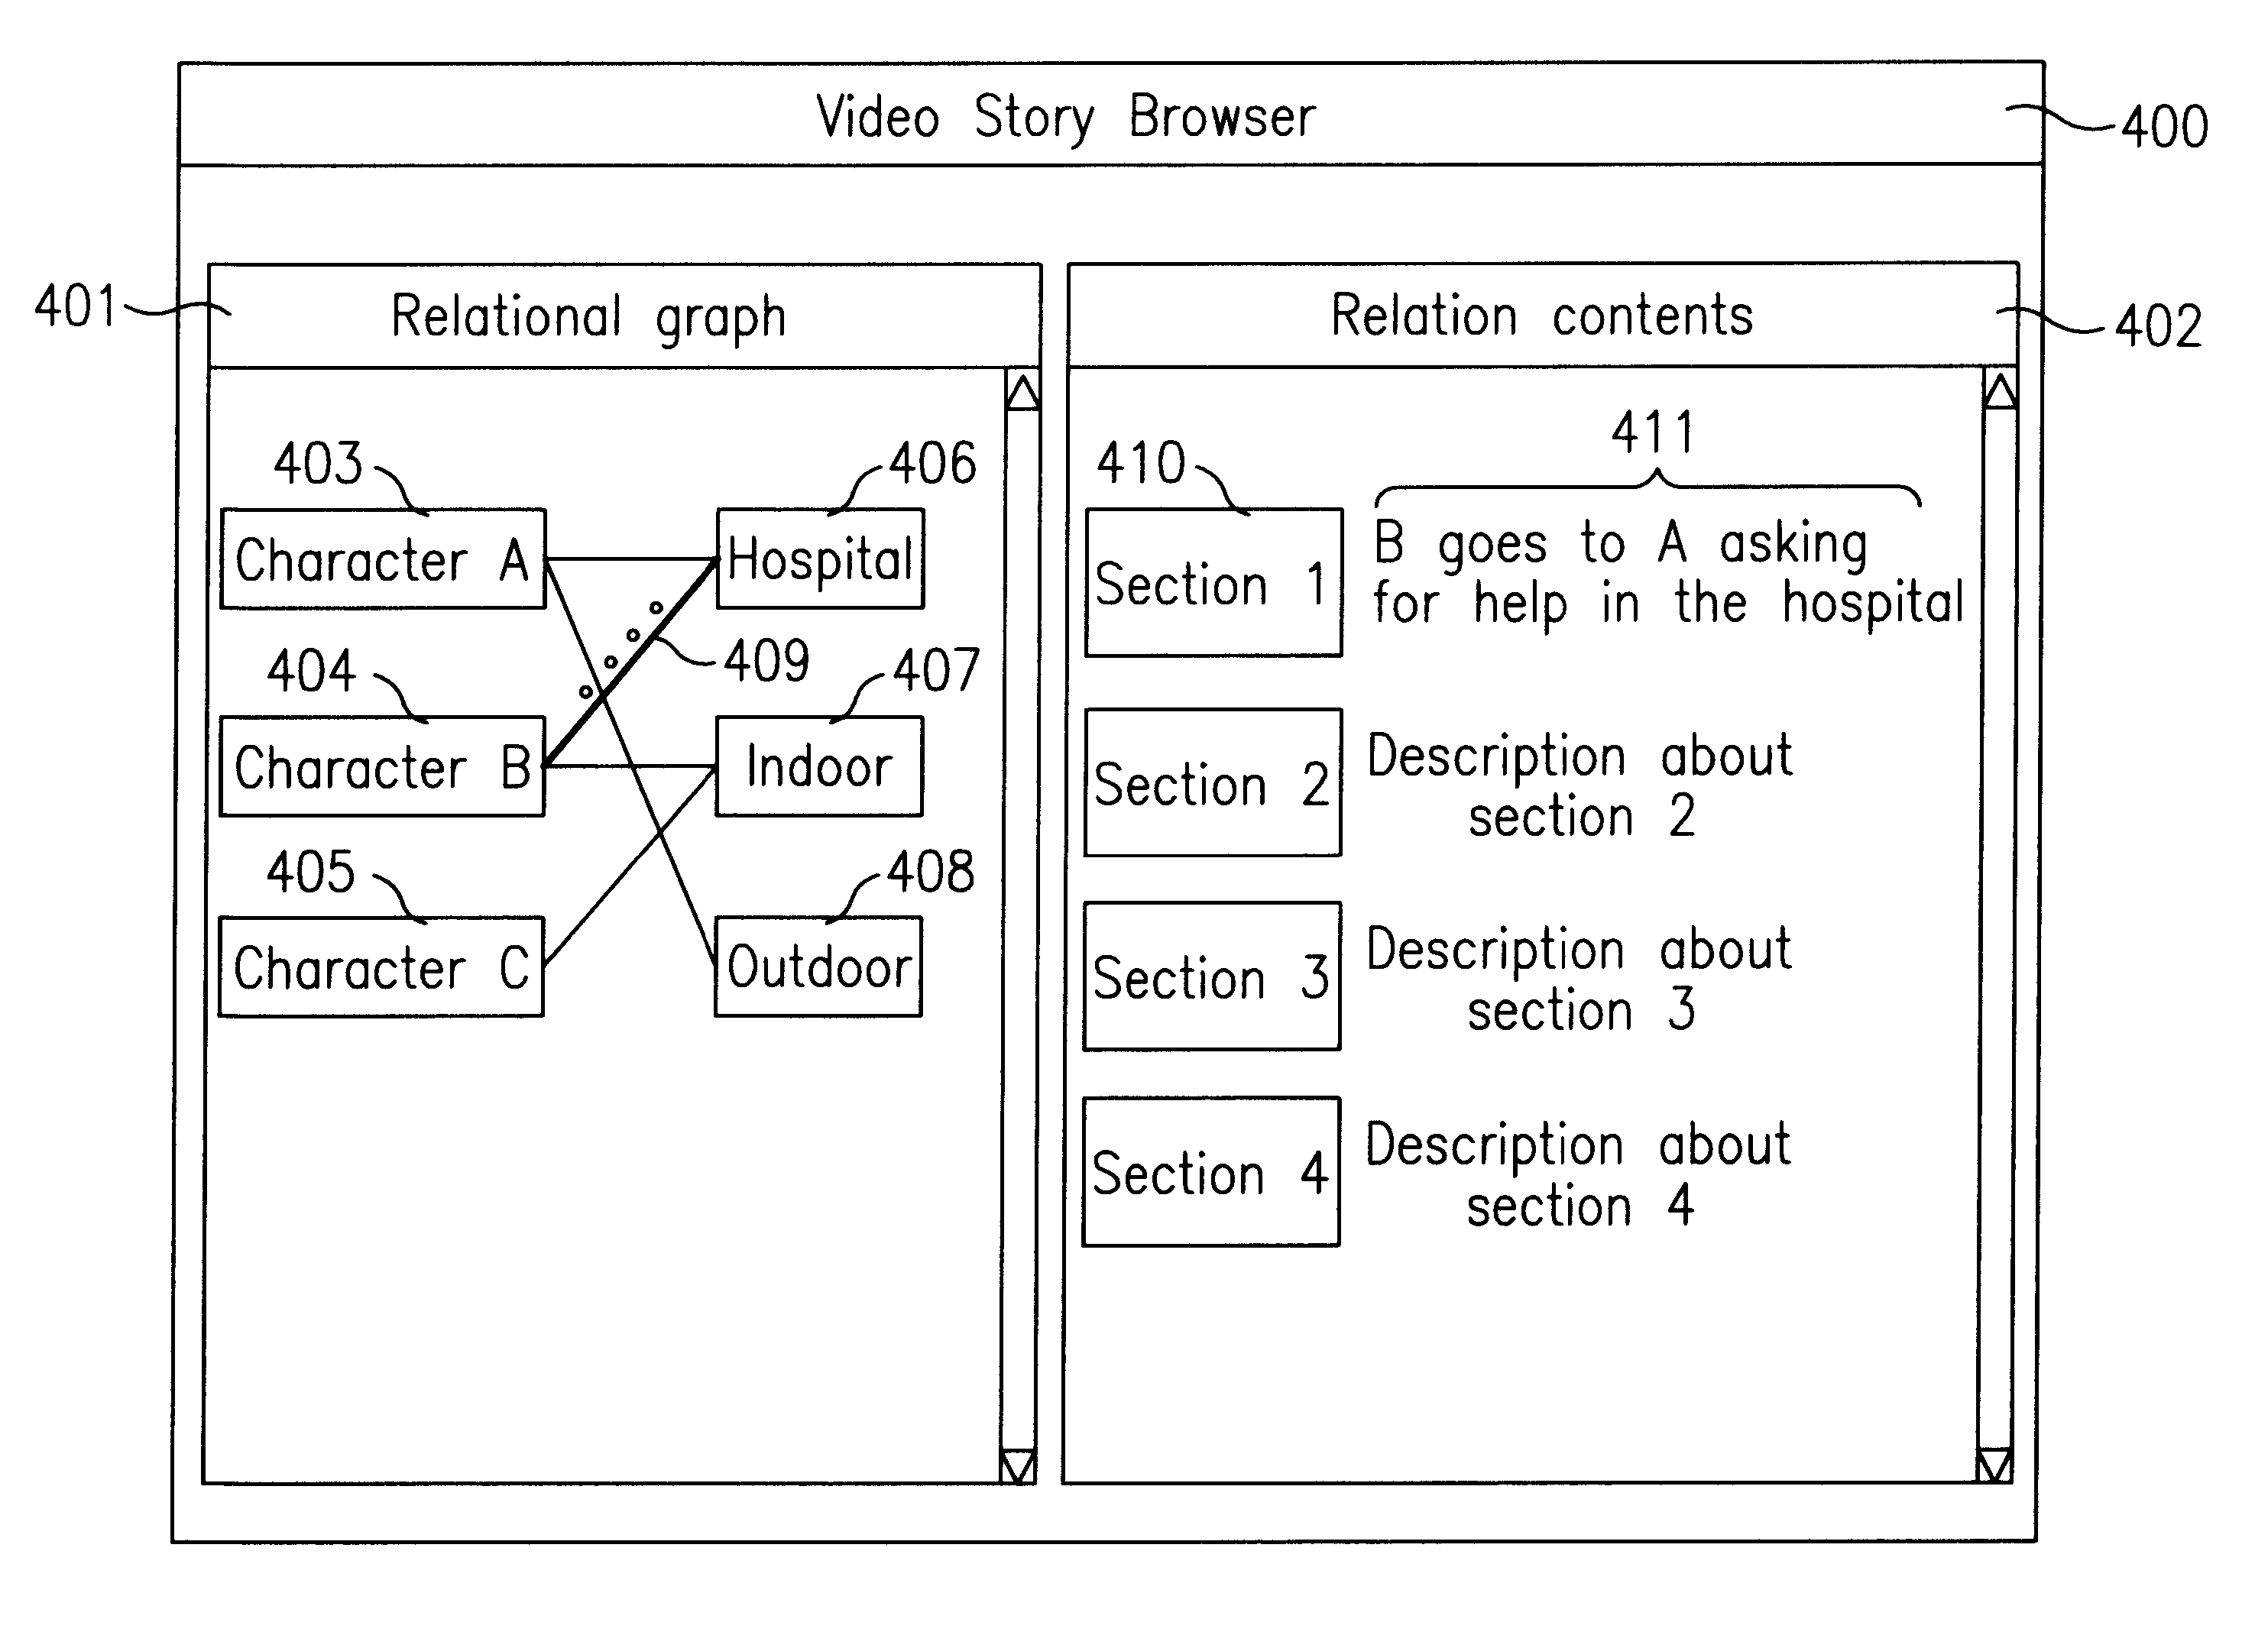 Contents-based video story browsing system